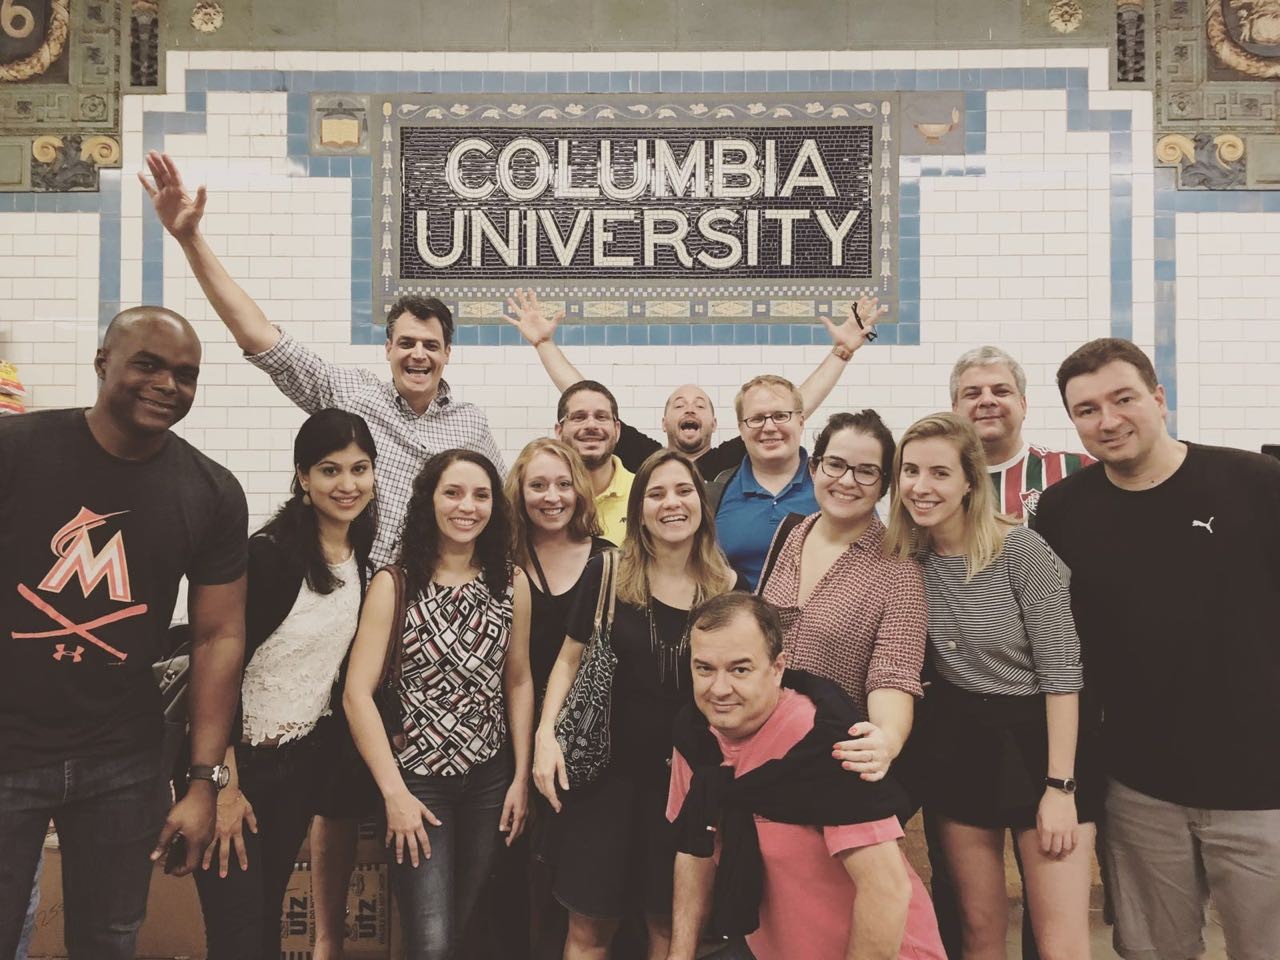 The Global EMPA class of 2017 at the Columbia University subway station in New York. Monica Vianna is in the middle front, wearing a black dress. Photo: Maria Luiza Paranhos